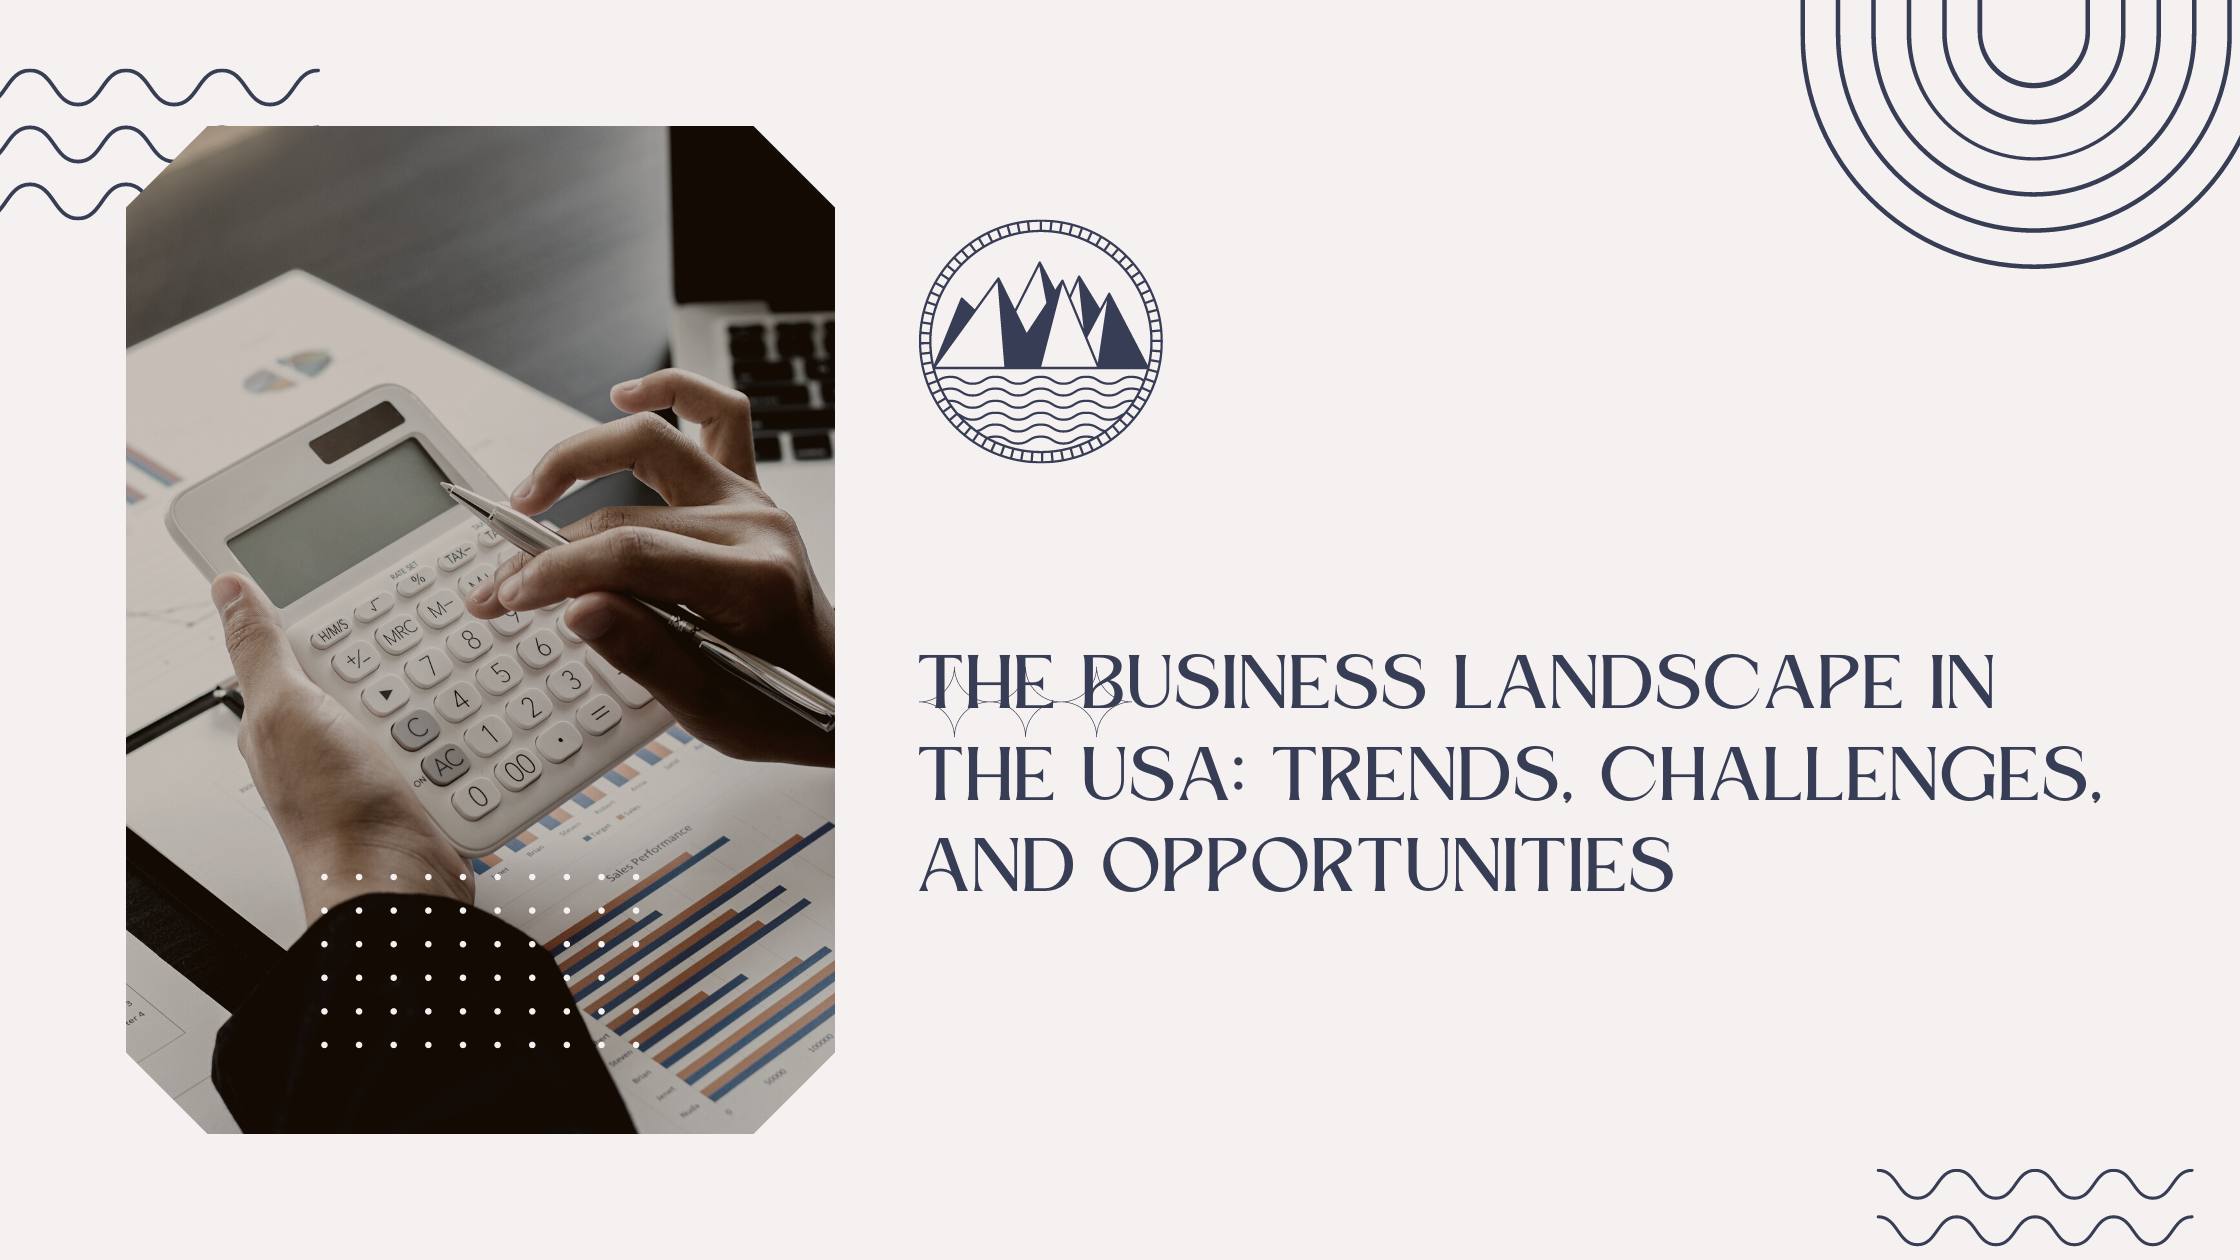 The Business Landscape in the USA: Trends, Challenges, and Opportunities